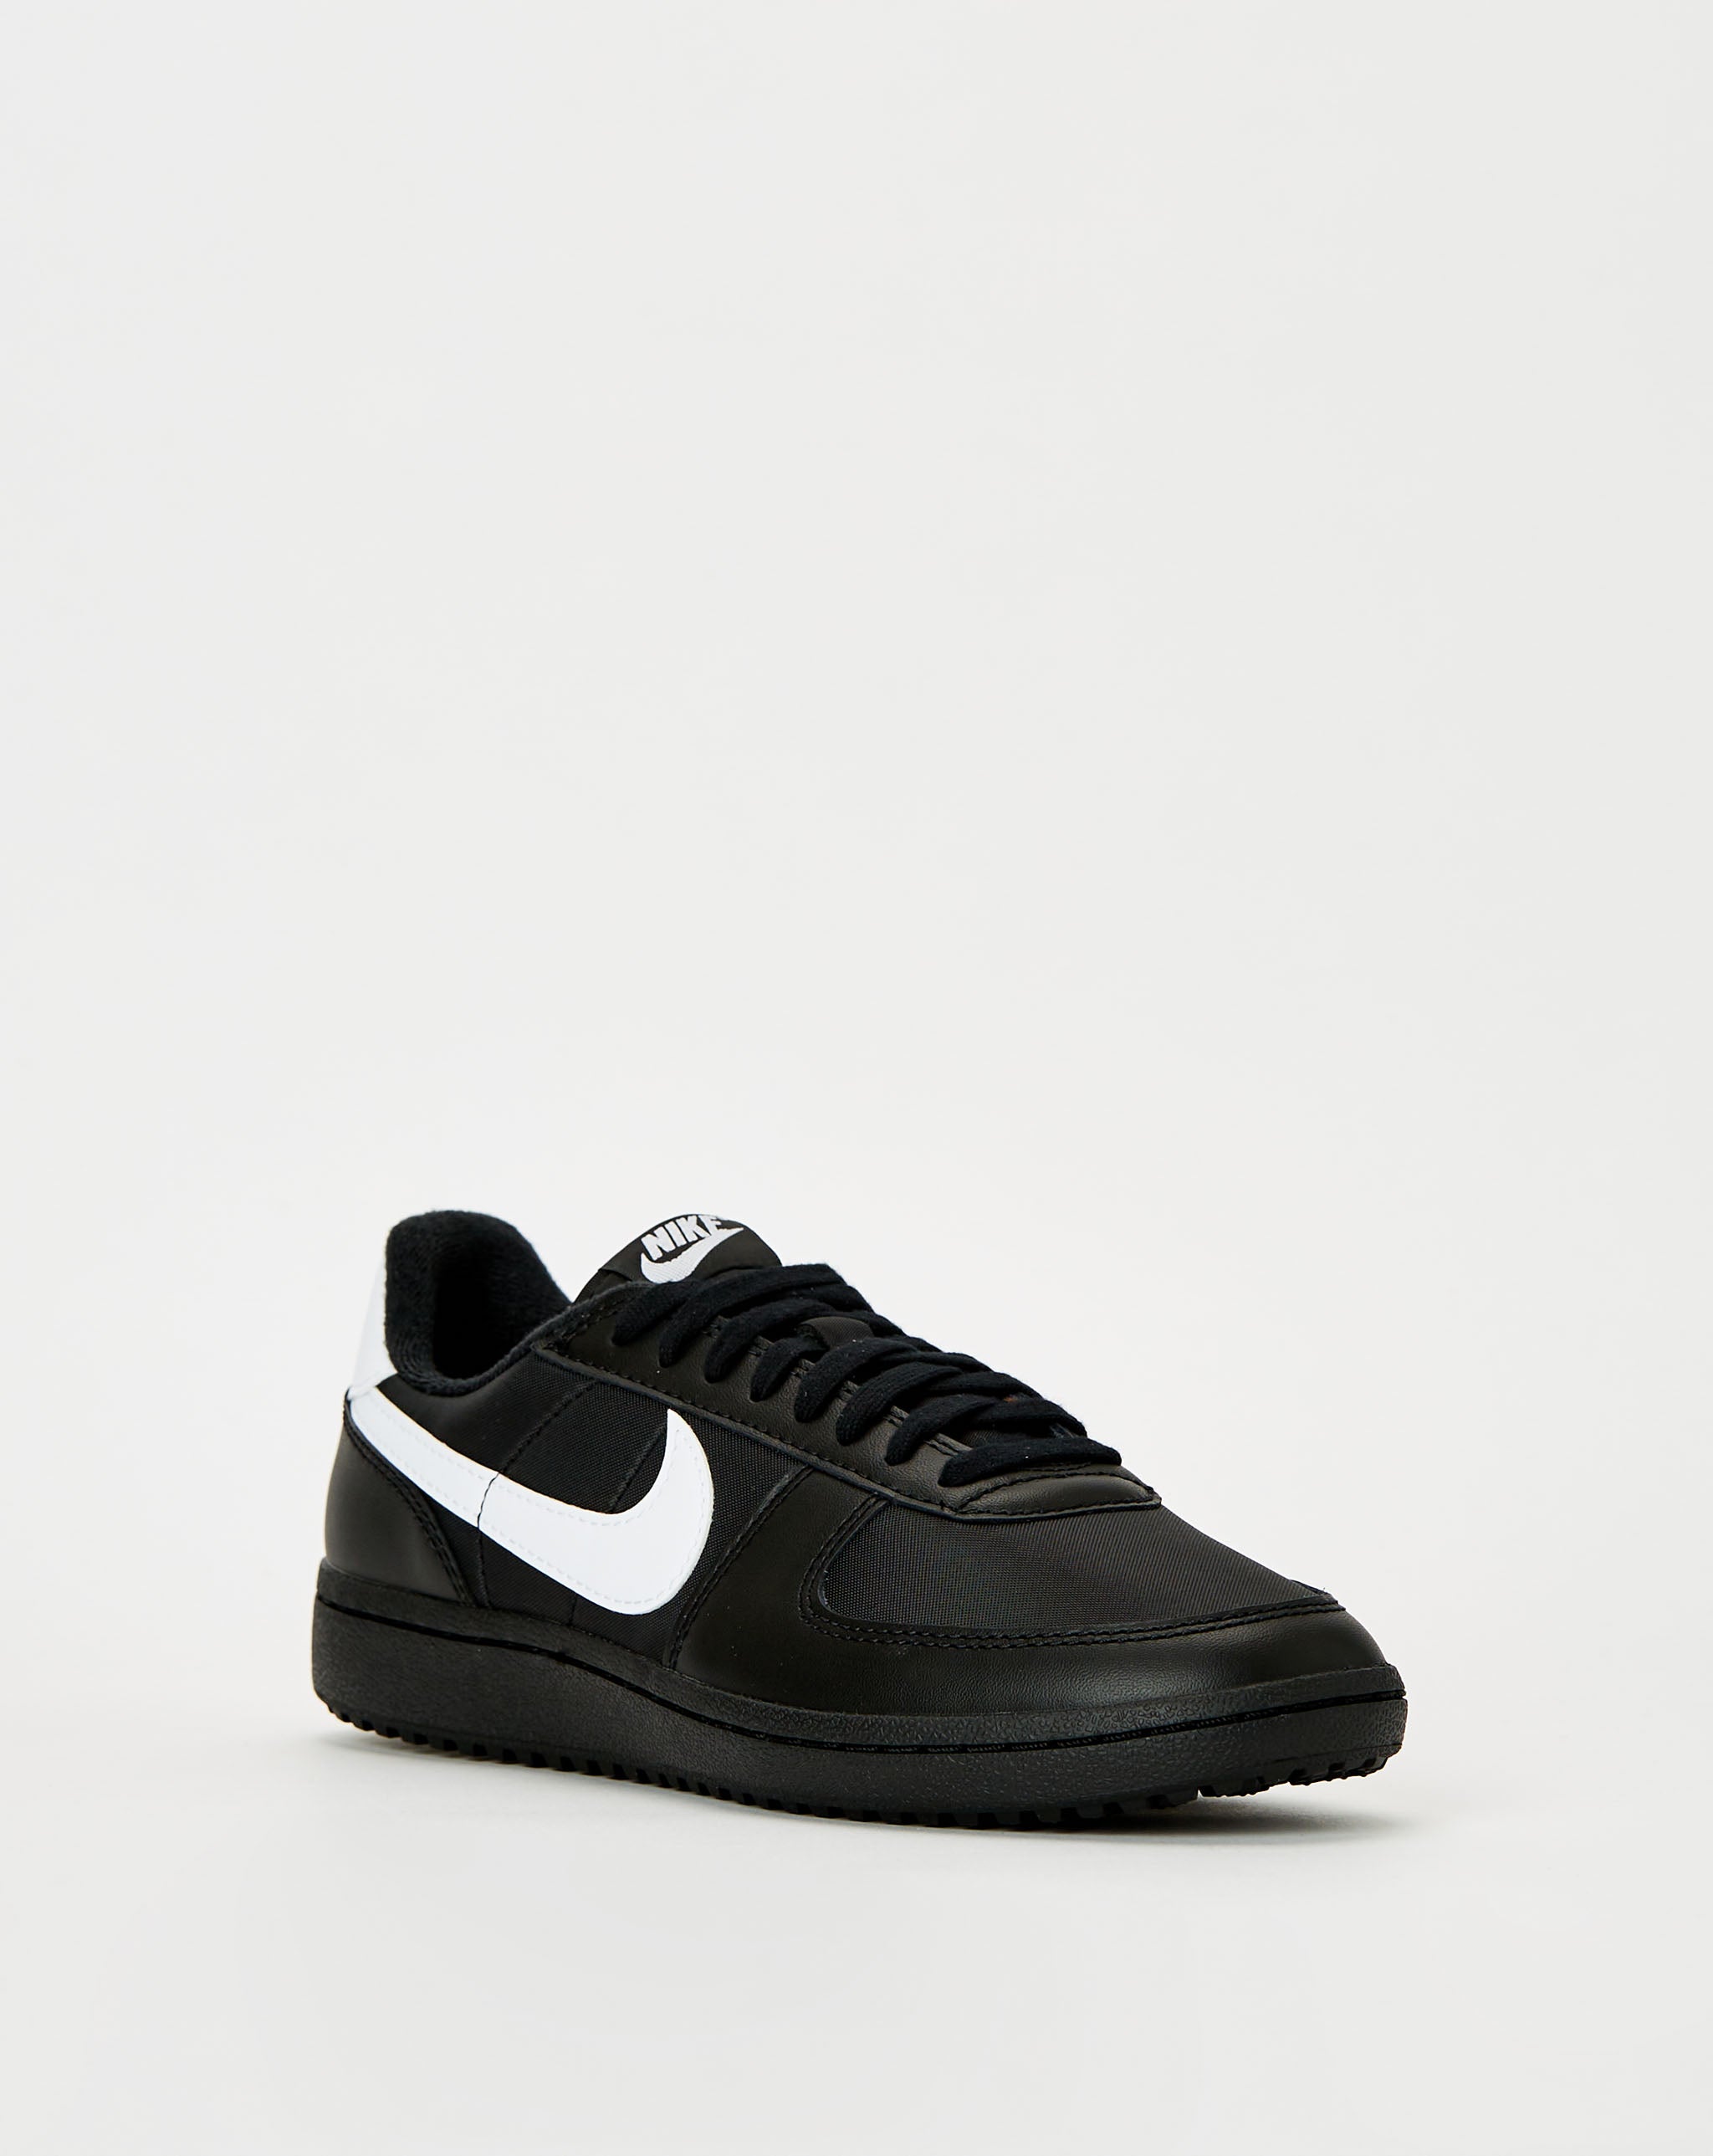 Nike sweatpants from Nike to style with your sneakers  - Cheap Erlebniswelt-fliegenfischen Jordan outlet